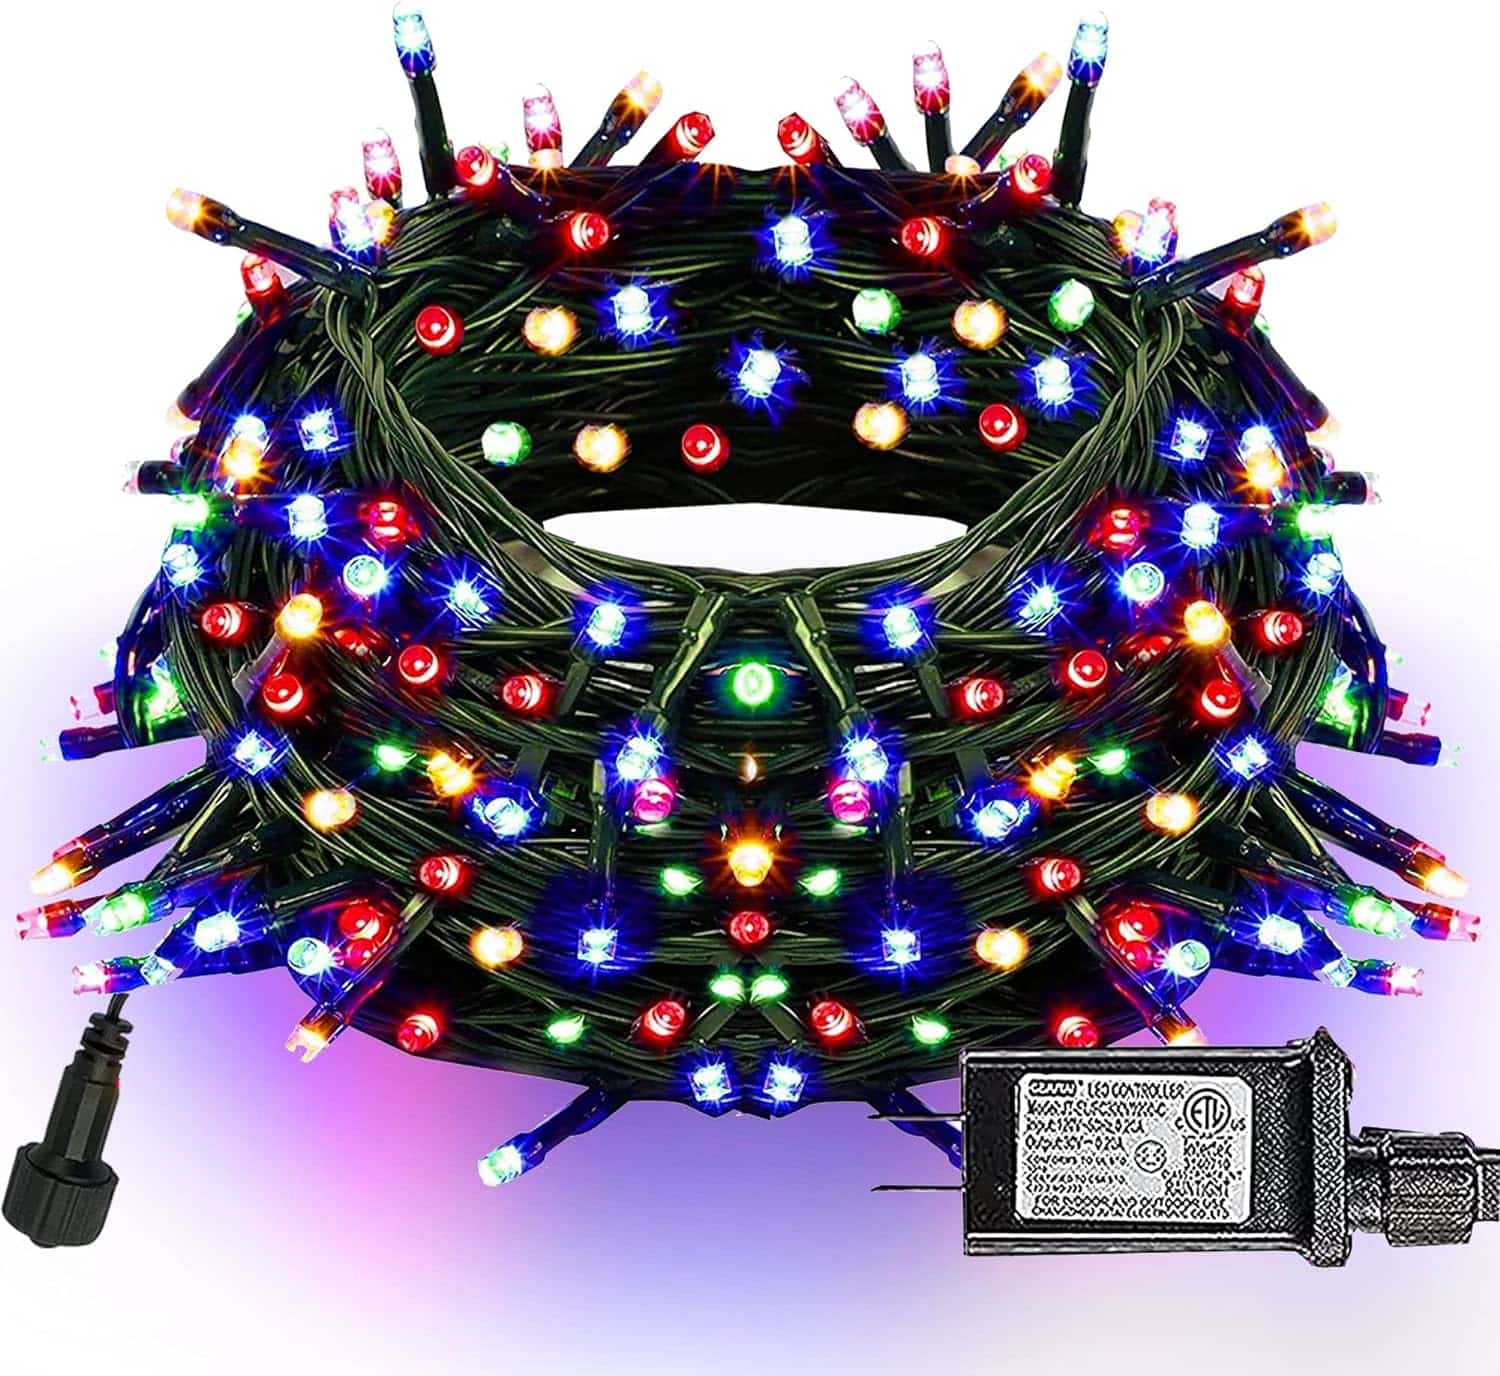 Dazzle Bright 300 LED Christmas String Lights Review